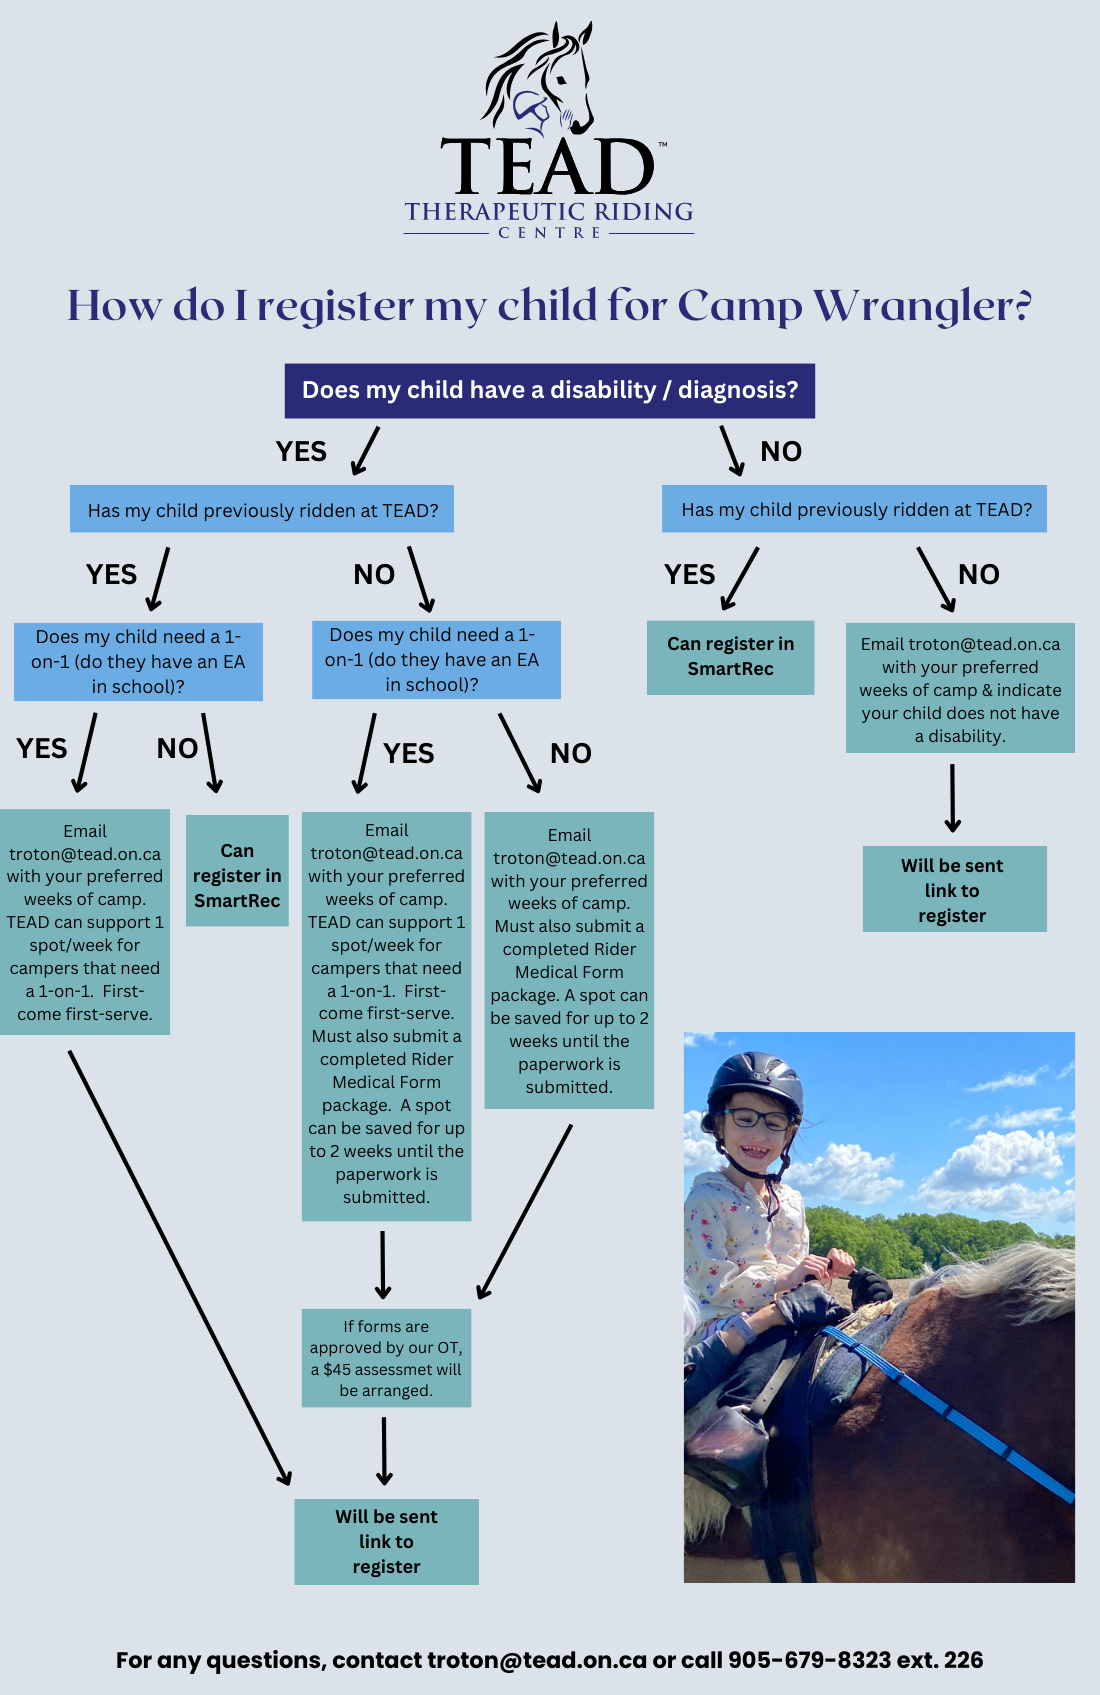 An infographic guide to registering for summer camp.  If you are unable to read the image, please contact troton@tead.on.ca